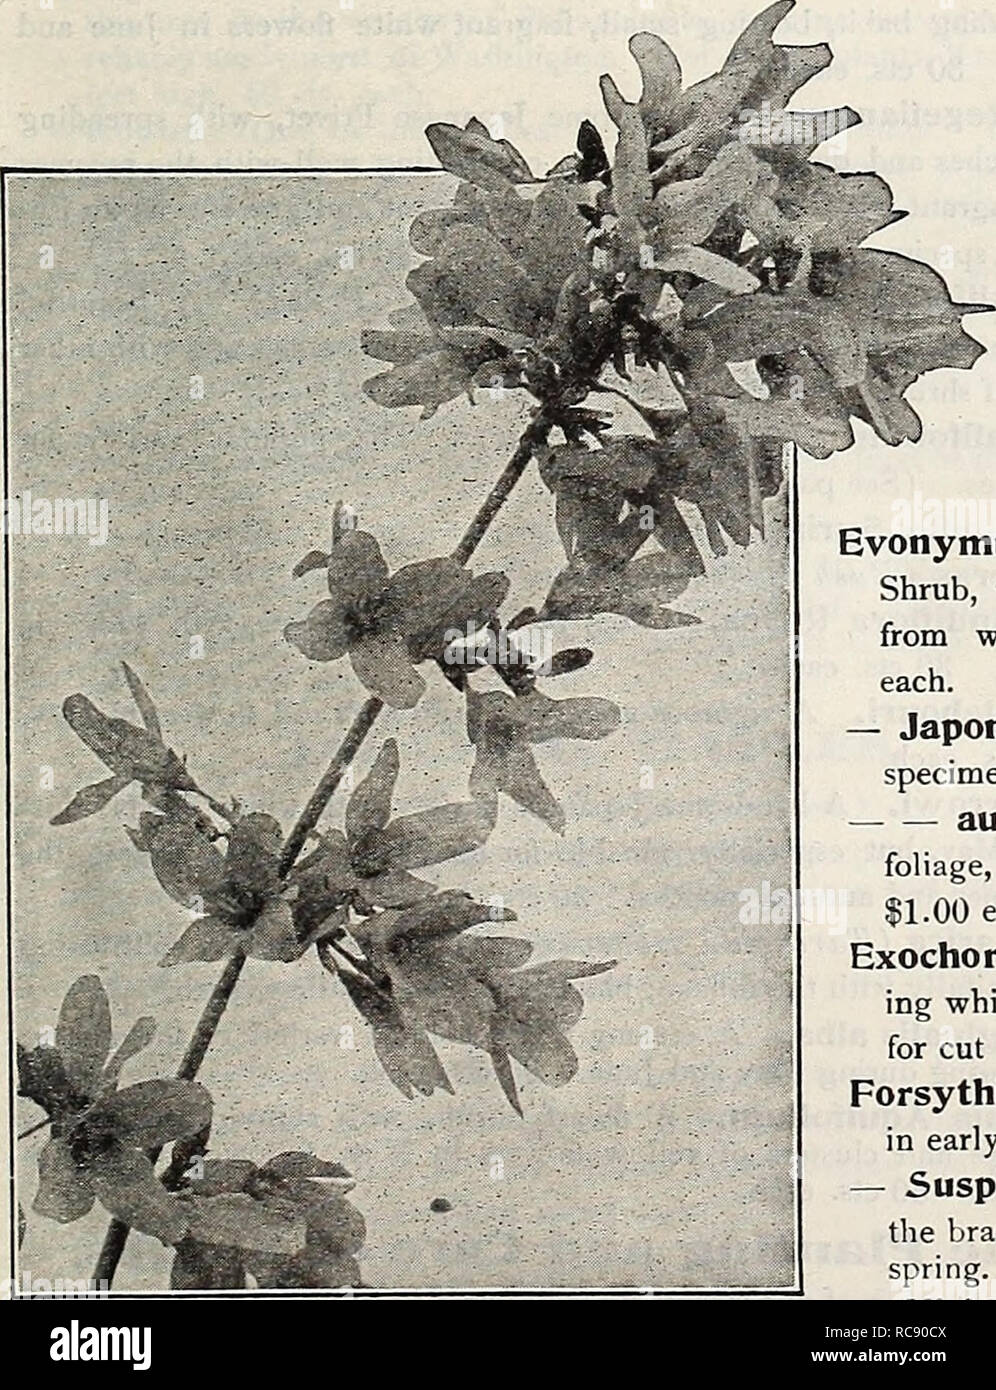 . Dreer's garden book 1917. Seeds Catalogs; Nursery stock Catalogs; Gardening Equipment and supplies Catalogs; Flowers Seeds Catalogs; Vegetables Seeds Catalogs; Fruit Seeds Catalogs. HmRTADREER-PHIlADfLPIIIA-PAW? CHOICE HARDY SHRUBS IIM ^ Desmodium Penduliflorum. A Shrub which dies to the ground in winter, but comes up vigorously in spring, throwing up shoots 3 to 4 feet high, which bear during September, when few Shrubs are in bloom, attractive sprays of bright rose-colored pea-shaped flowers. 30 cts. each, Detltzias. Well-known profuse flowering Shrubs, blooming in spring or early summer. S Stock Photo